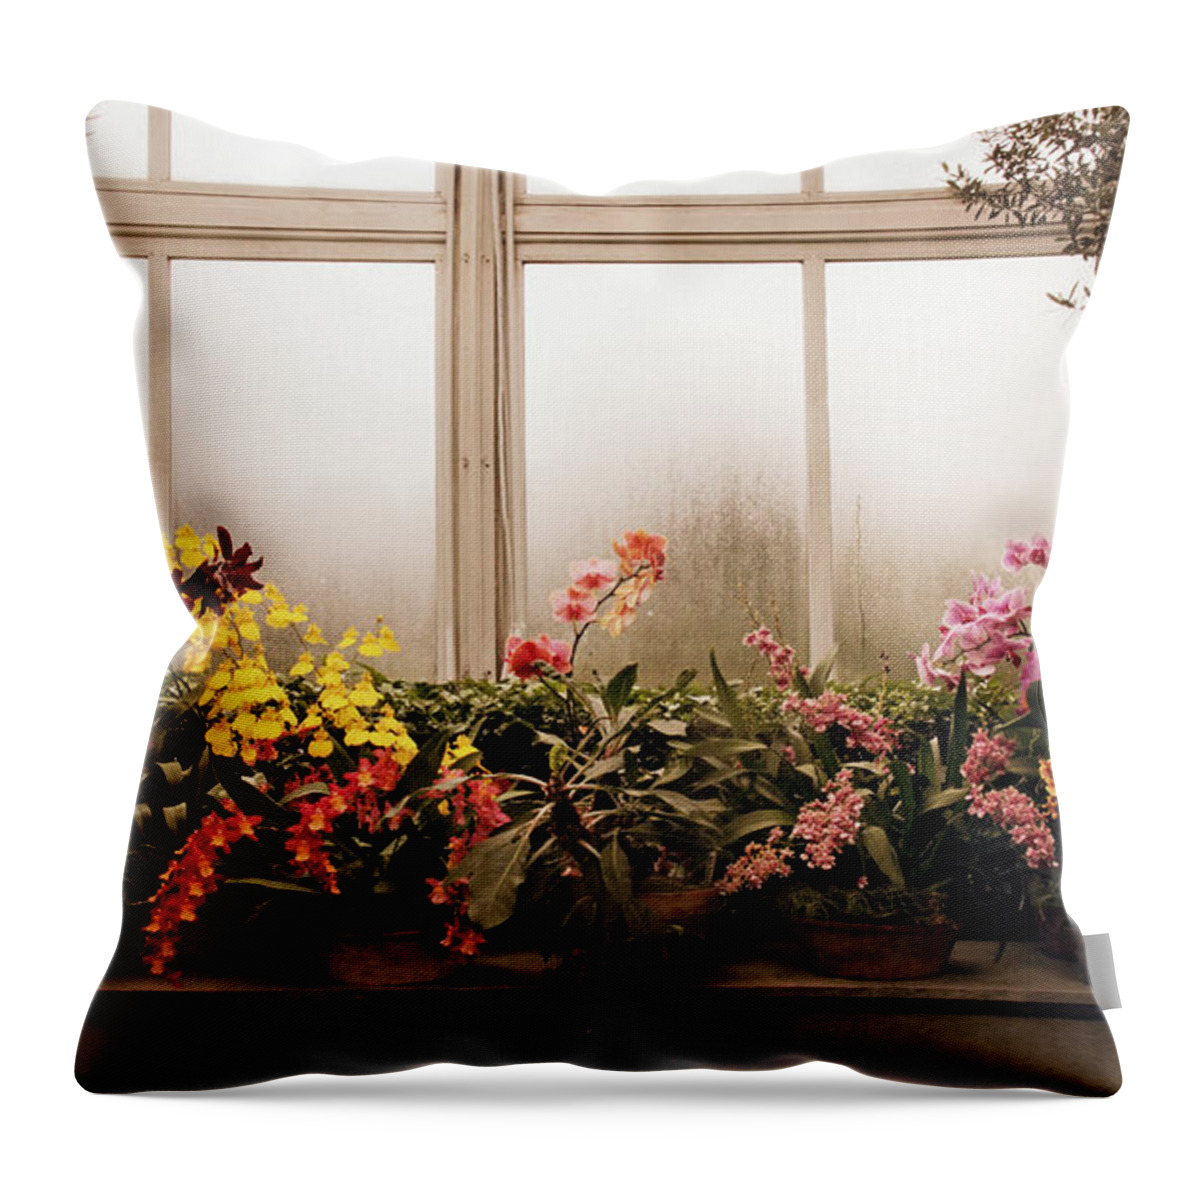 Flowers Throw Pillow featuring the photograph Rainy Day Orchids by Jessica Jenney